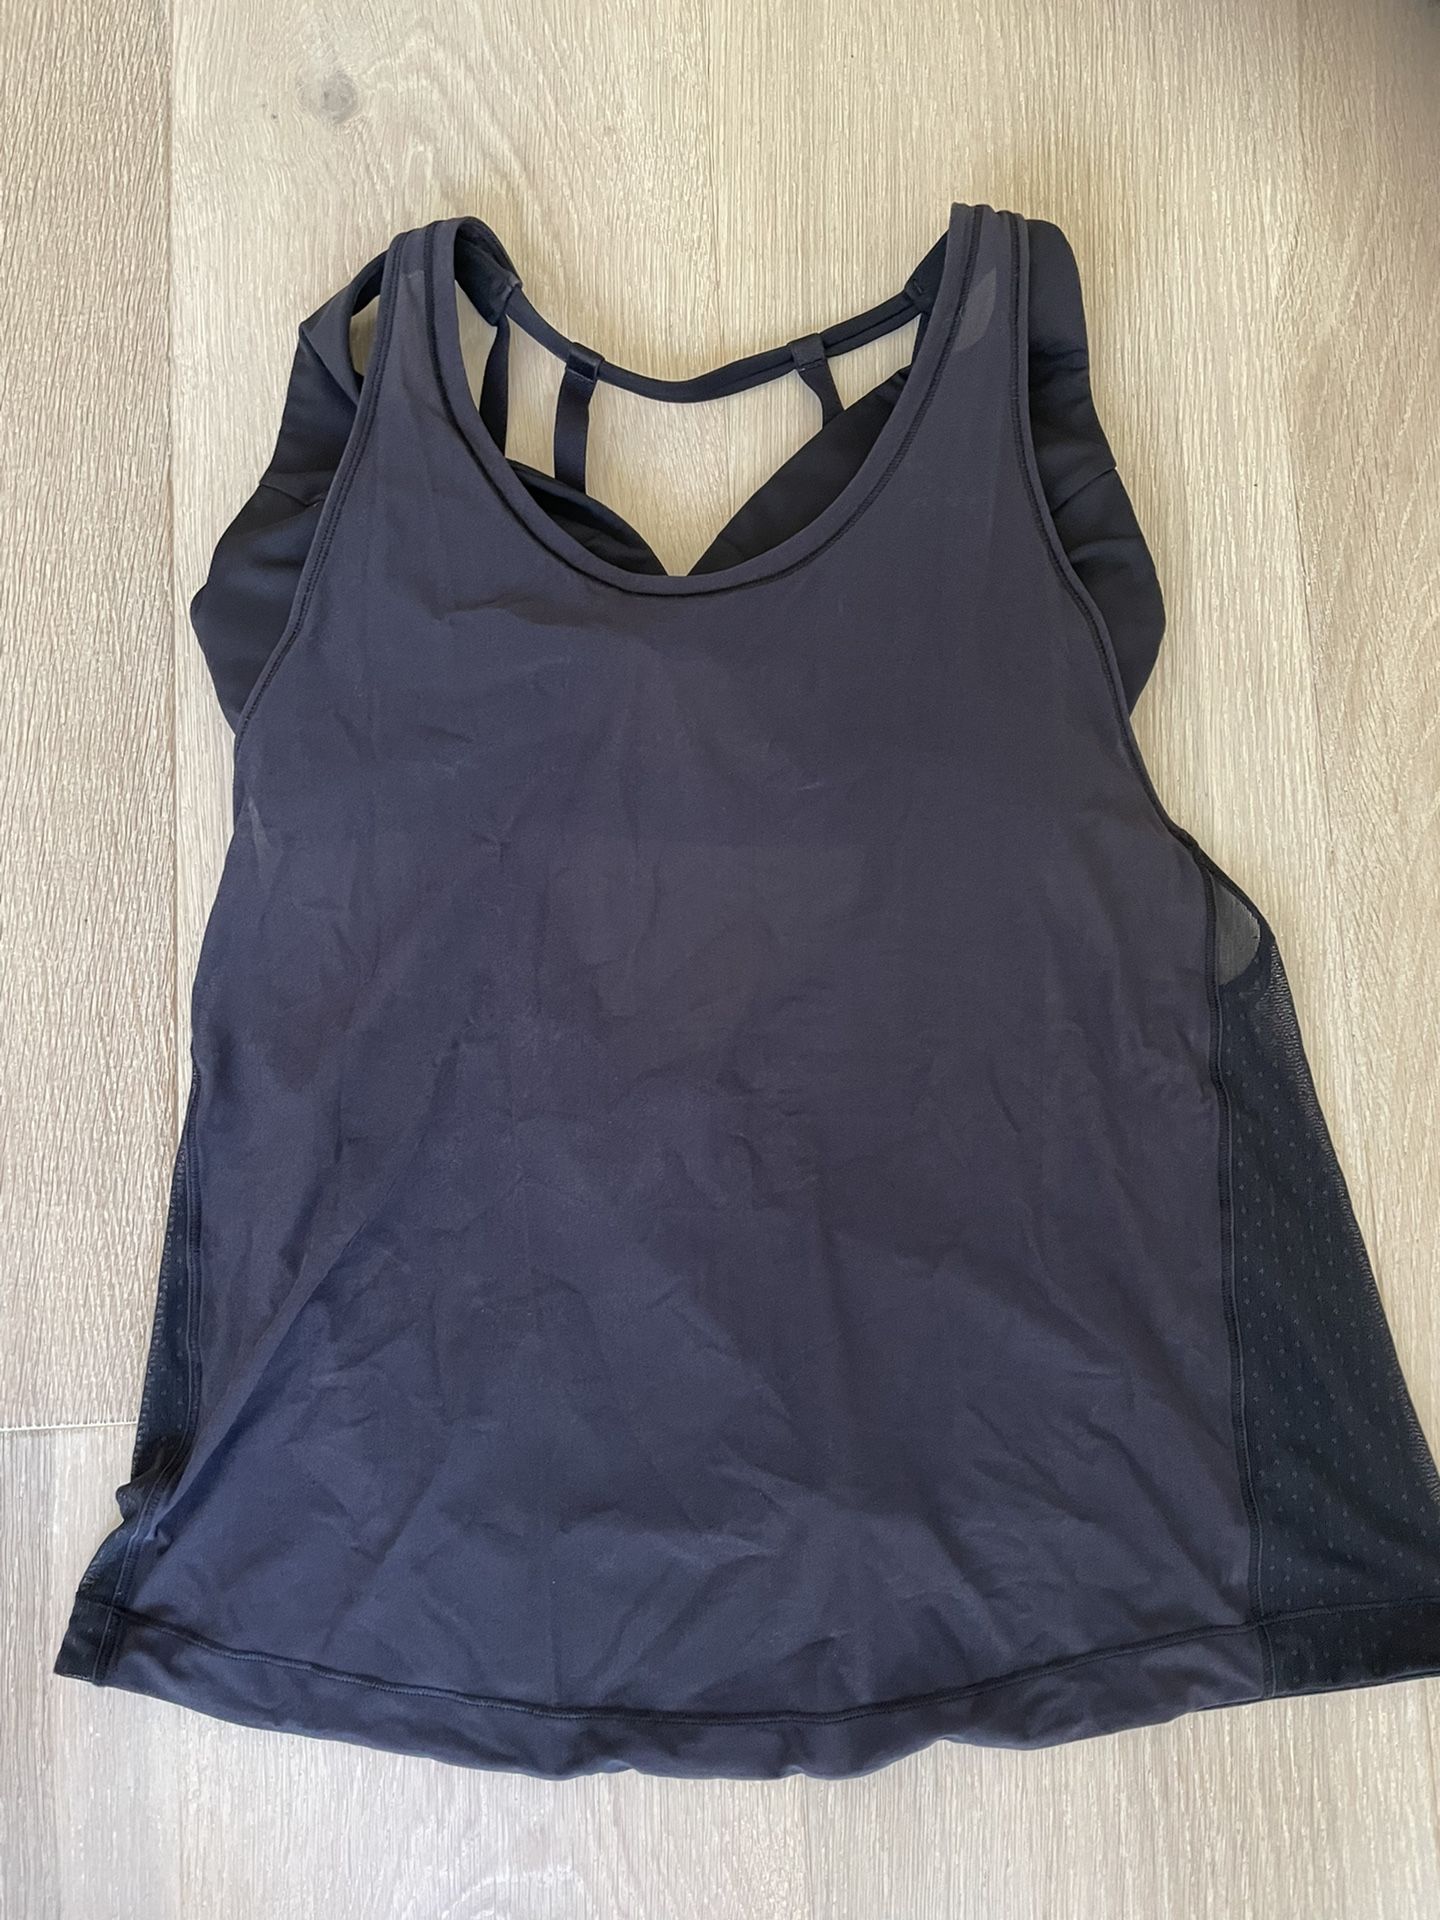 Lululemon Woman’s Strappy Tank Too Built In Bra Size 10